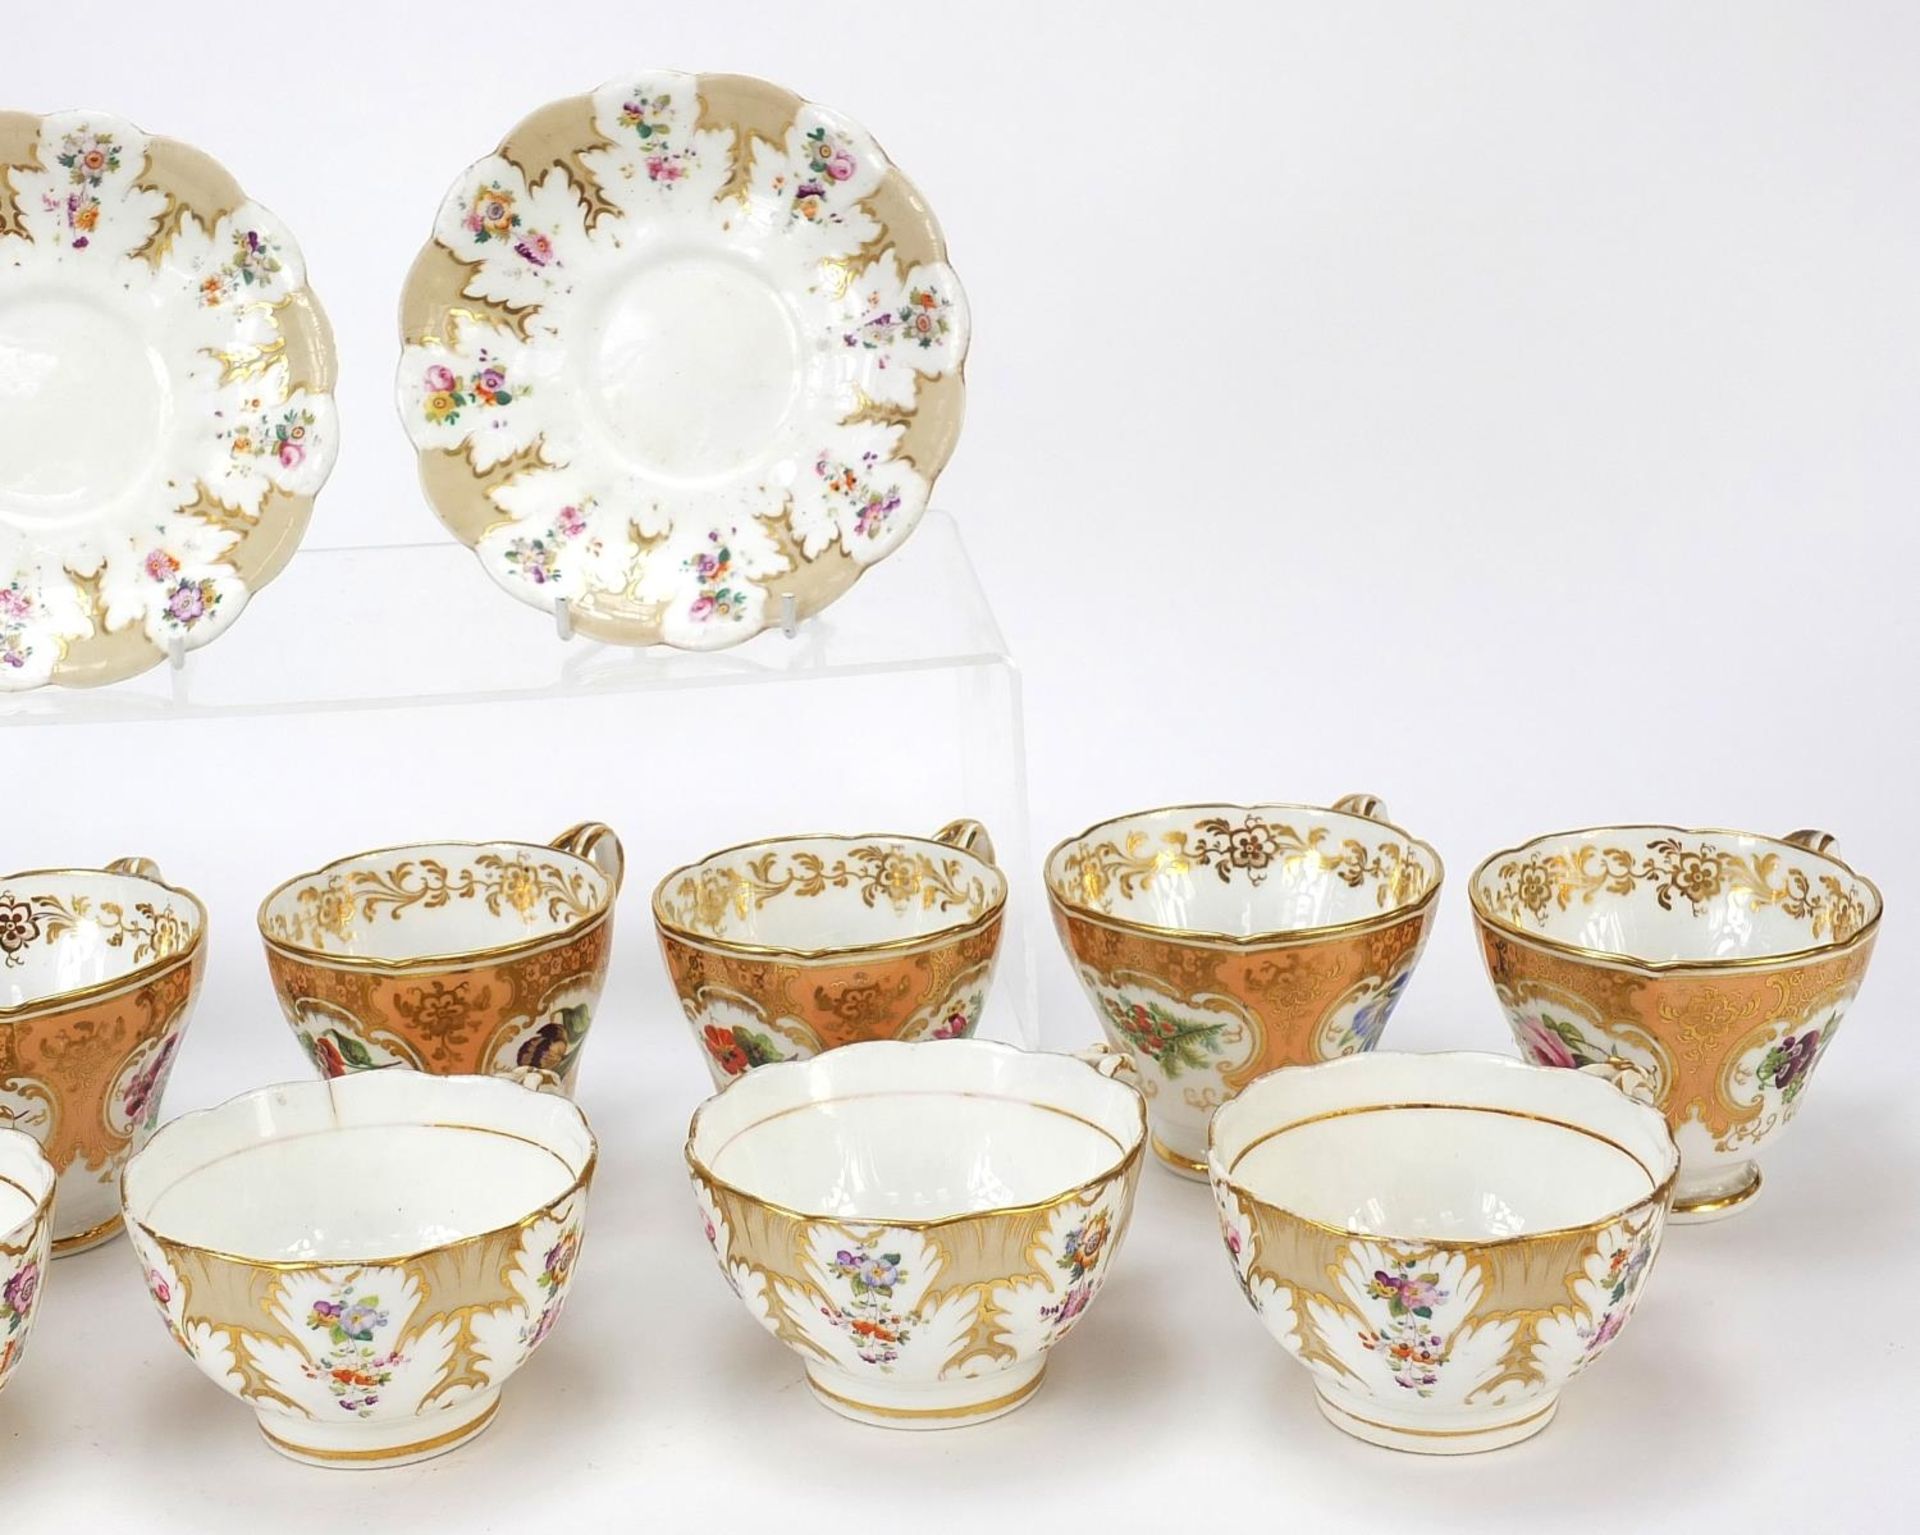 Early 19th century English teaware hand painted with flowers, patter number 174 and 2253, the - Image 3 of 7